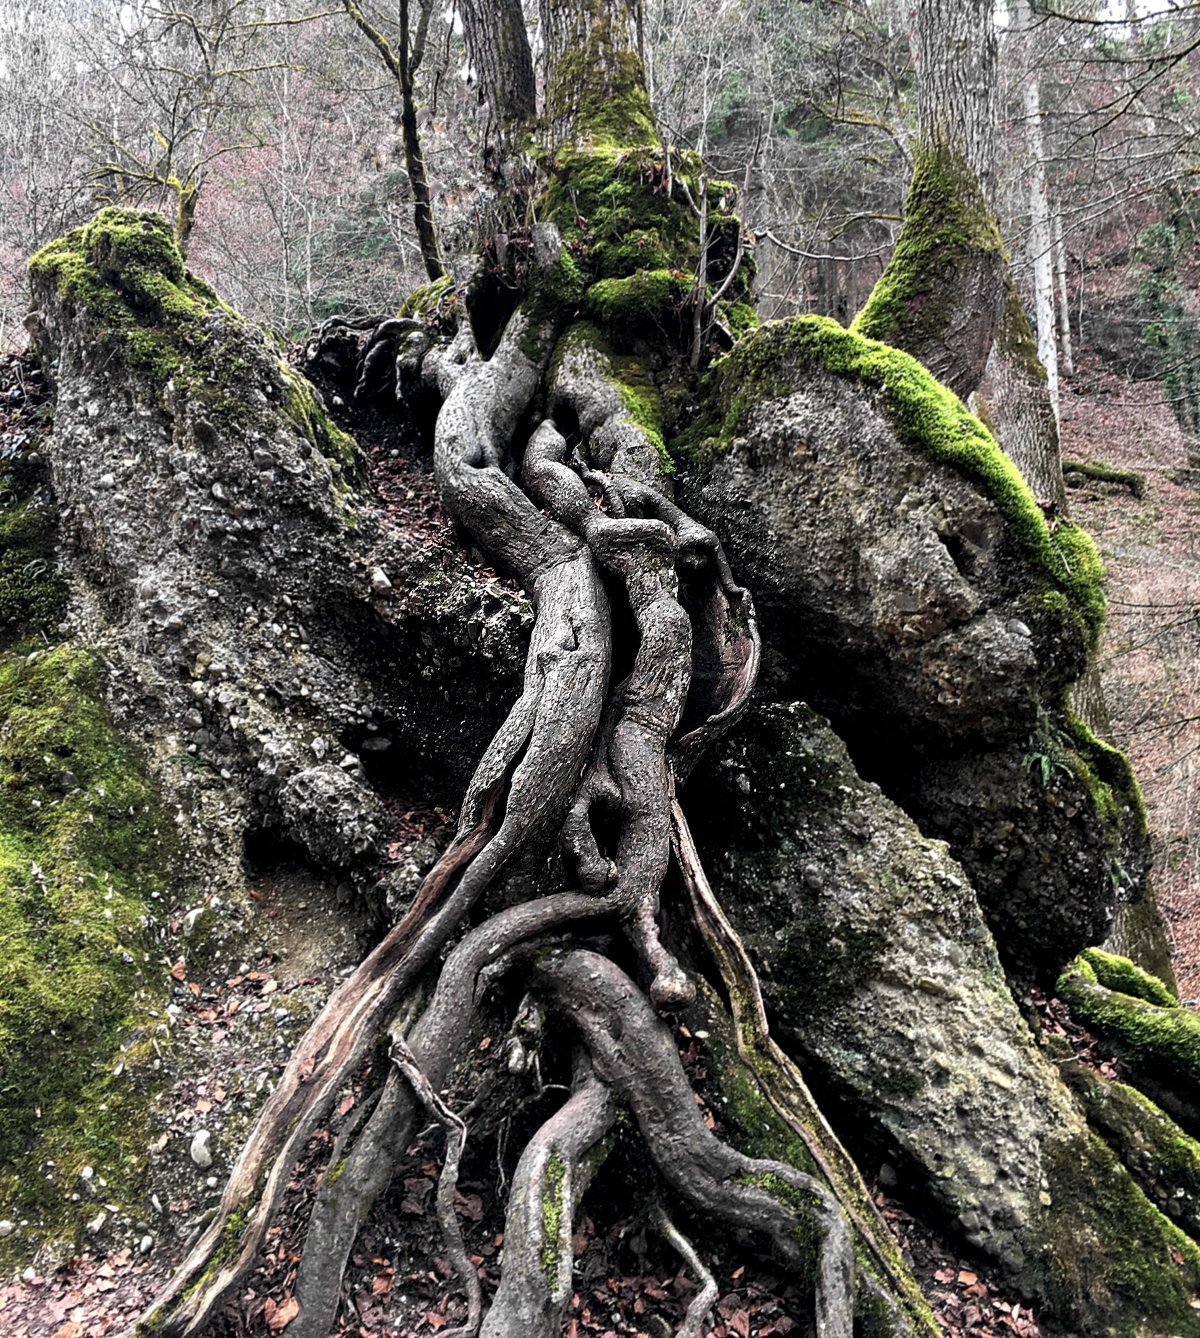 Partial picture of old tree roots